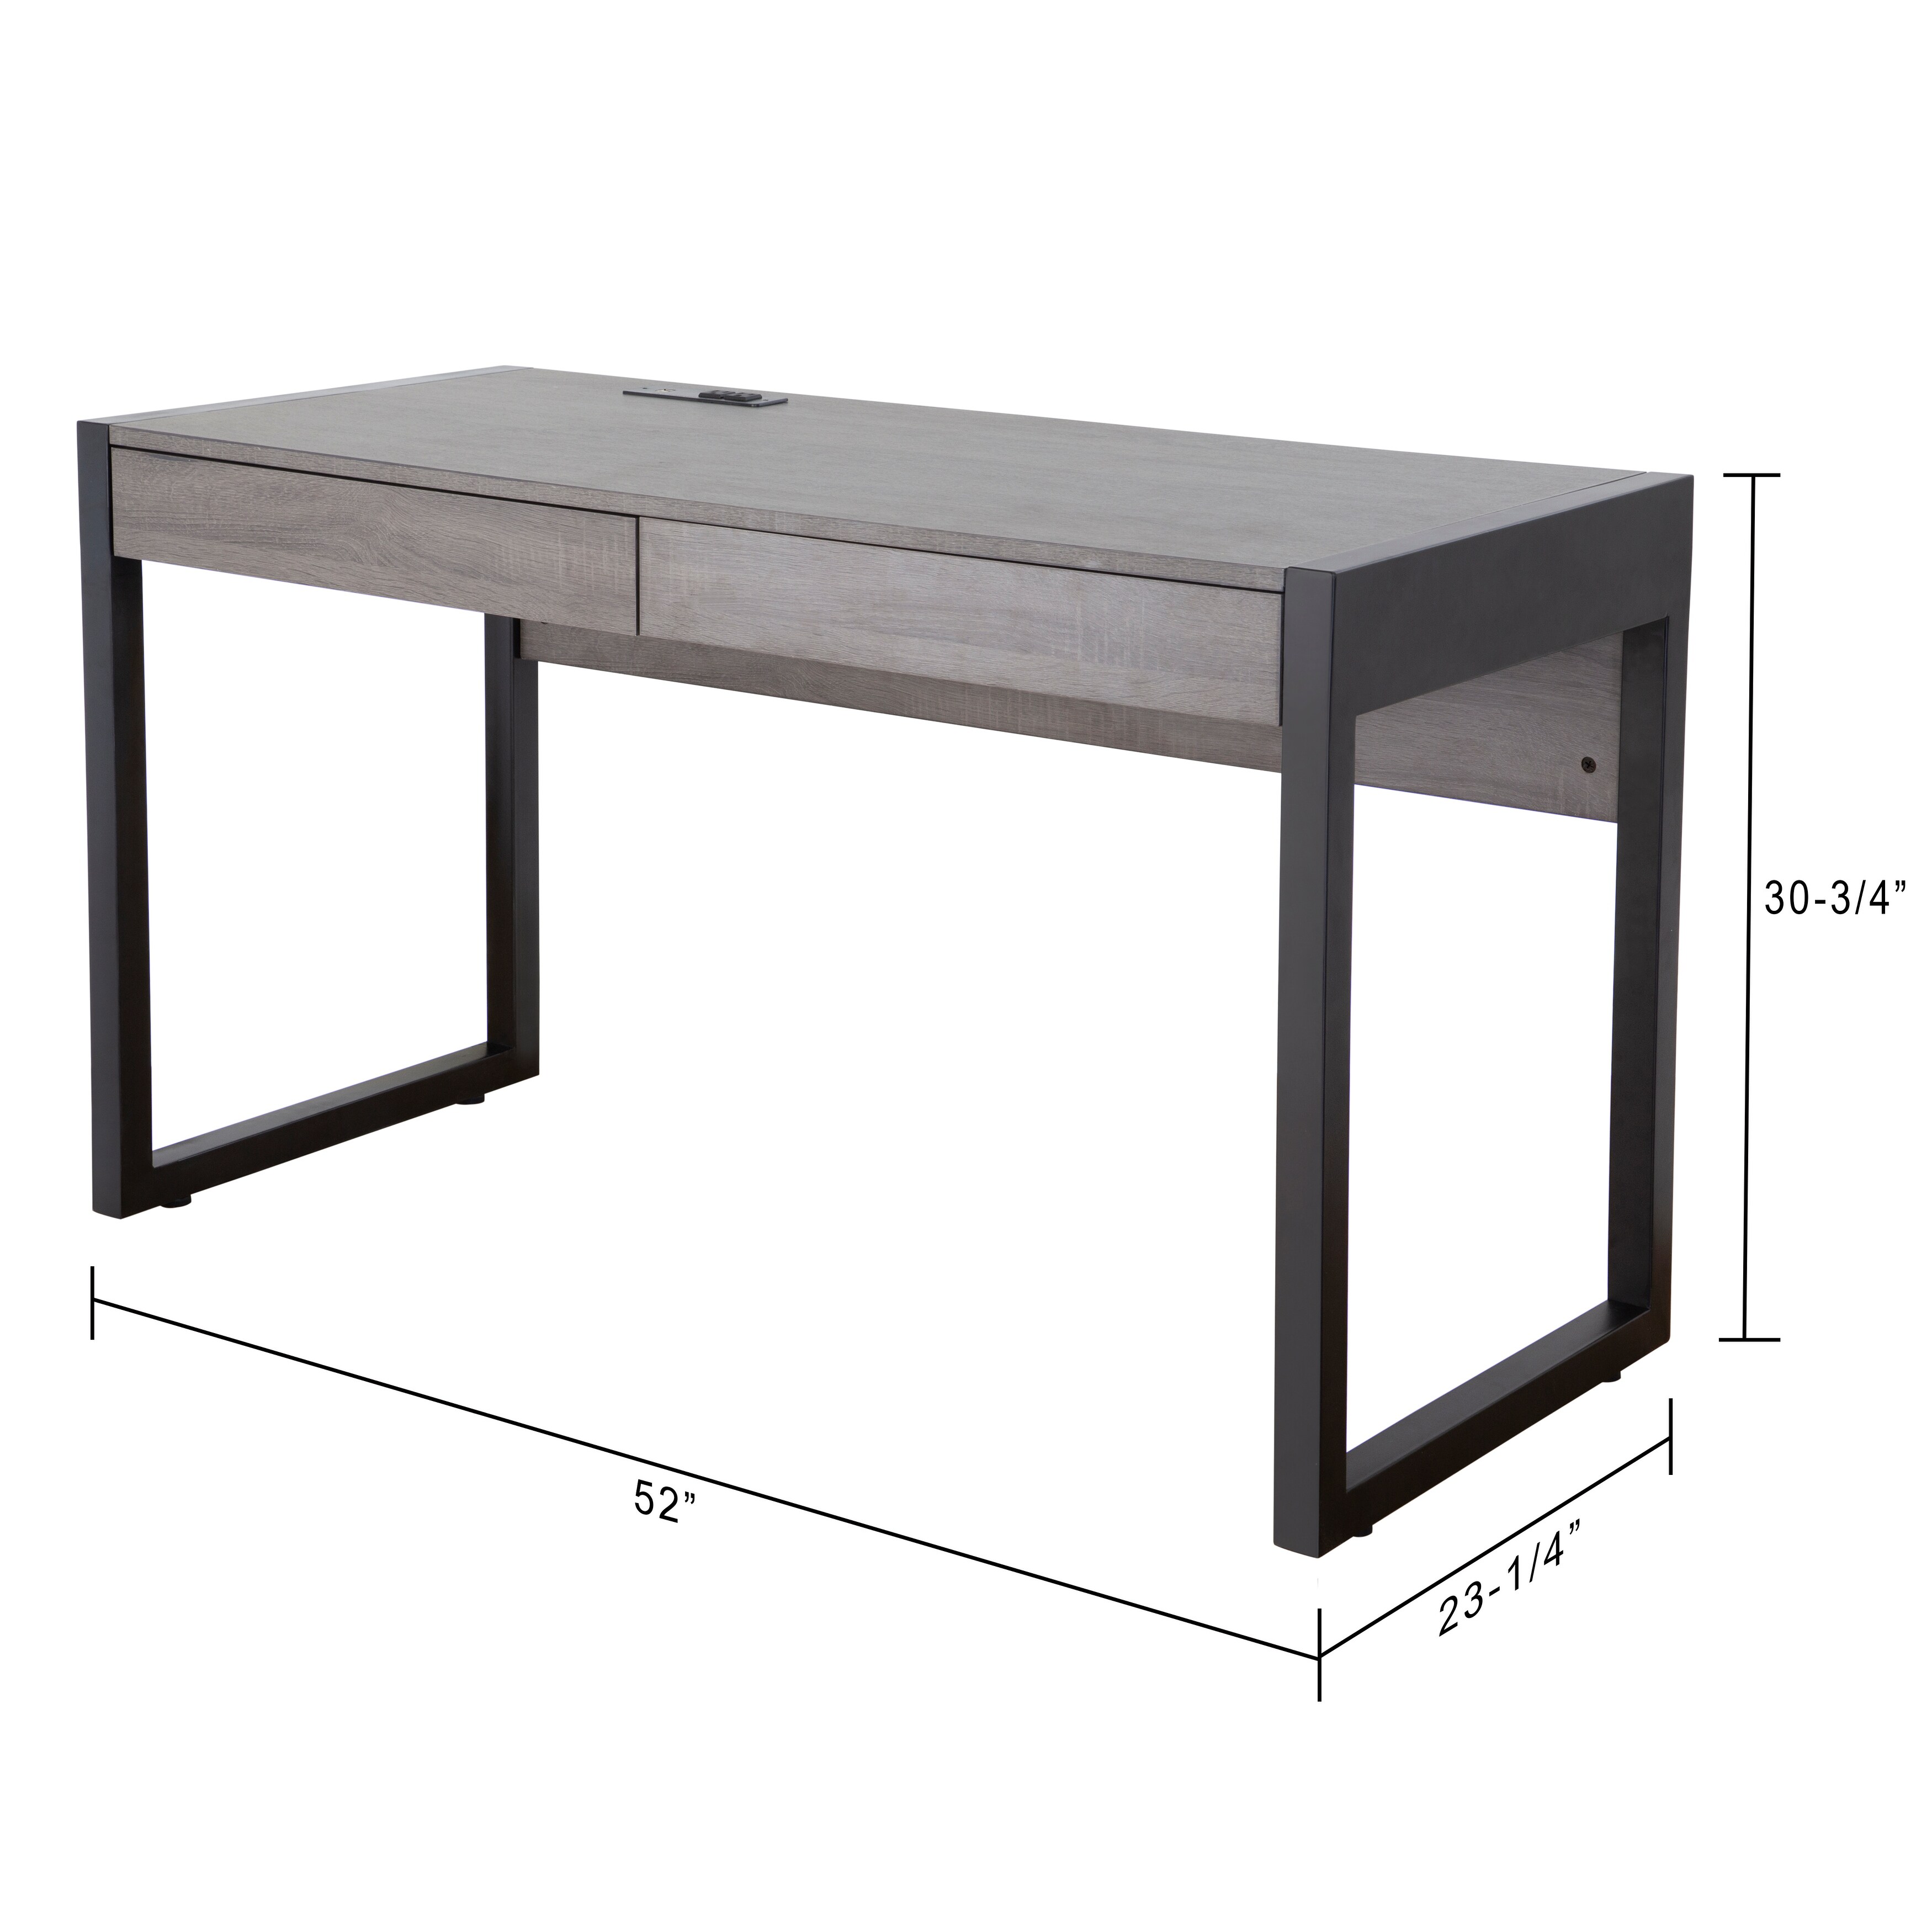 https://ak1.ostkcdn.com/images/products/is/images/direct/7b4eb0fe652425409271221606ed0642ab4fbf36/Q-Max-52%22W-Writing-Desk-With-Two-Drawers%2C-Power-Outlet%2C-USB-Ports---Modern-Computer-Table---Work-Desk-for-Home%2C-Office%2C-Bedroom.jpg